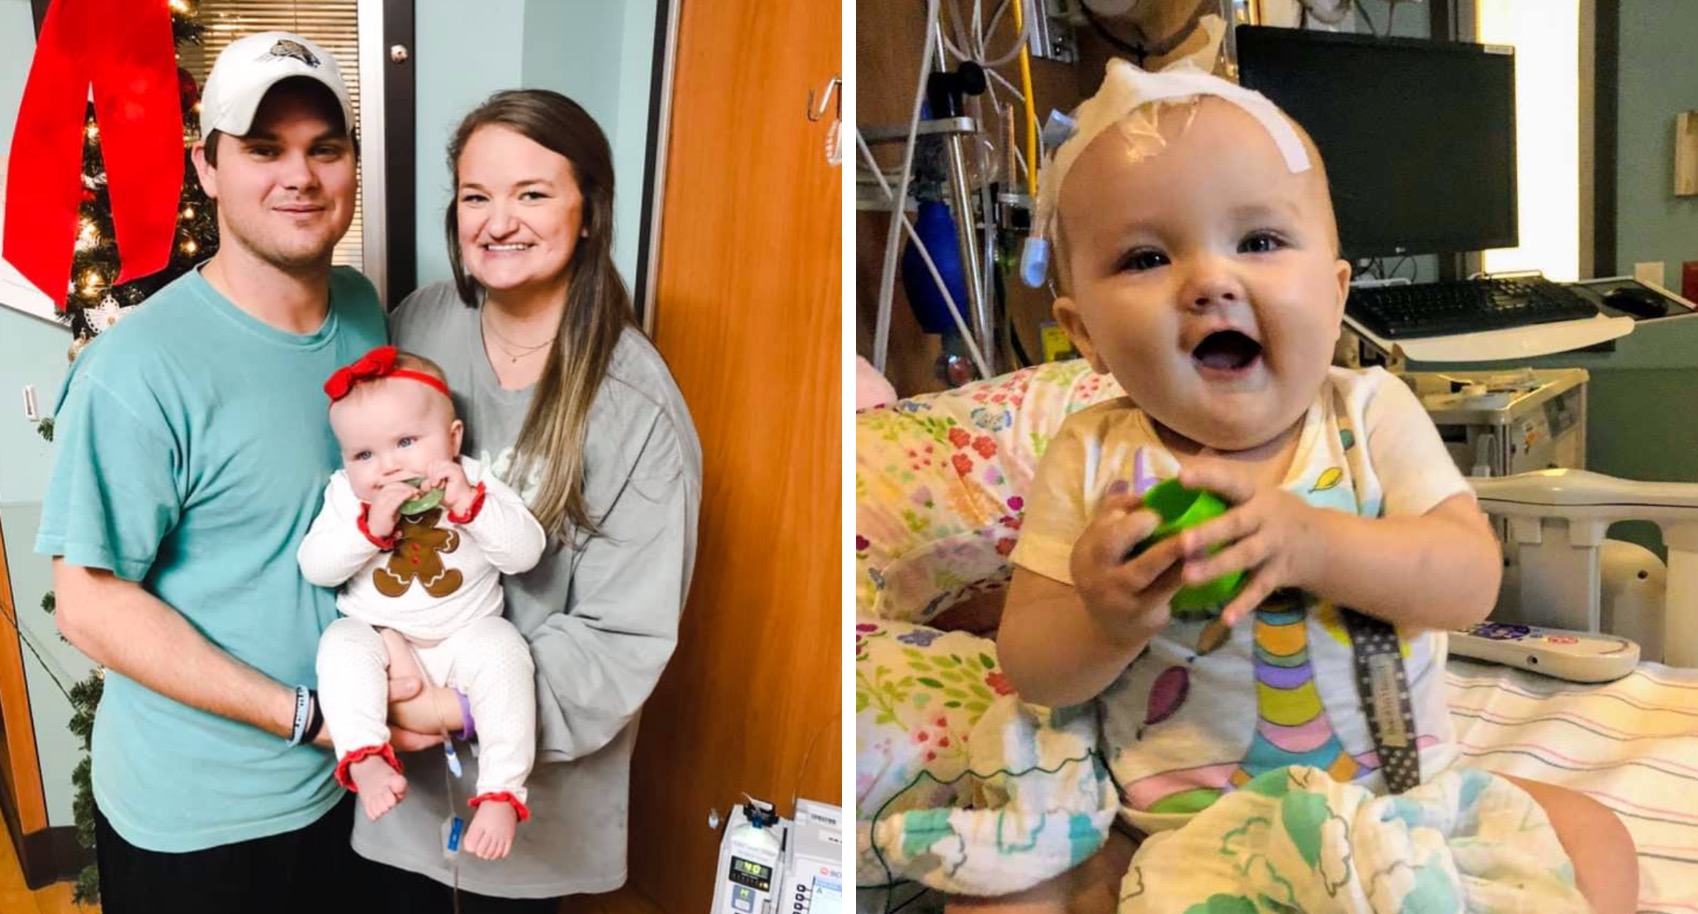 Teachers Donate 100 Sick Days to Dad Caring for Infant Daughter With Cancer